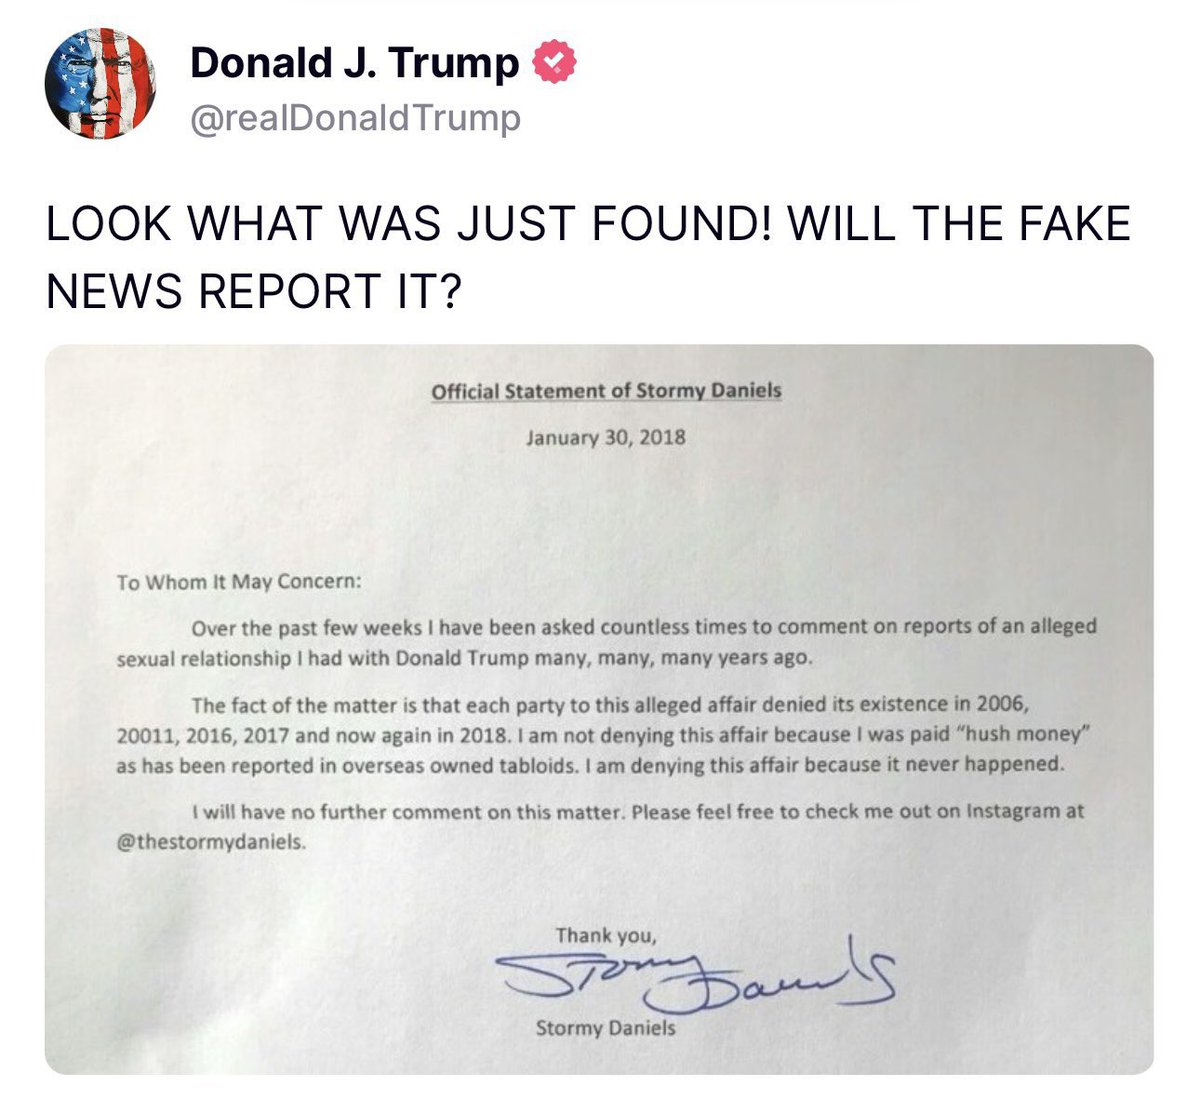 Judge Merchan made Trump delete this post and fined him $9,000 dollars. Meanwhile, Stormy Daniels has been on X lying about Trump. She admitted to being a fraud. Why isn't this case thrown out? It's bogus and election interference. Please share this out.